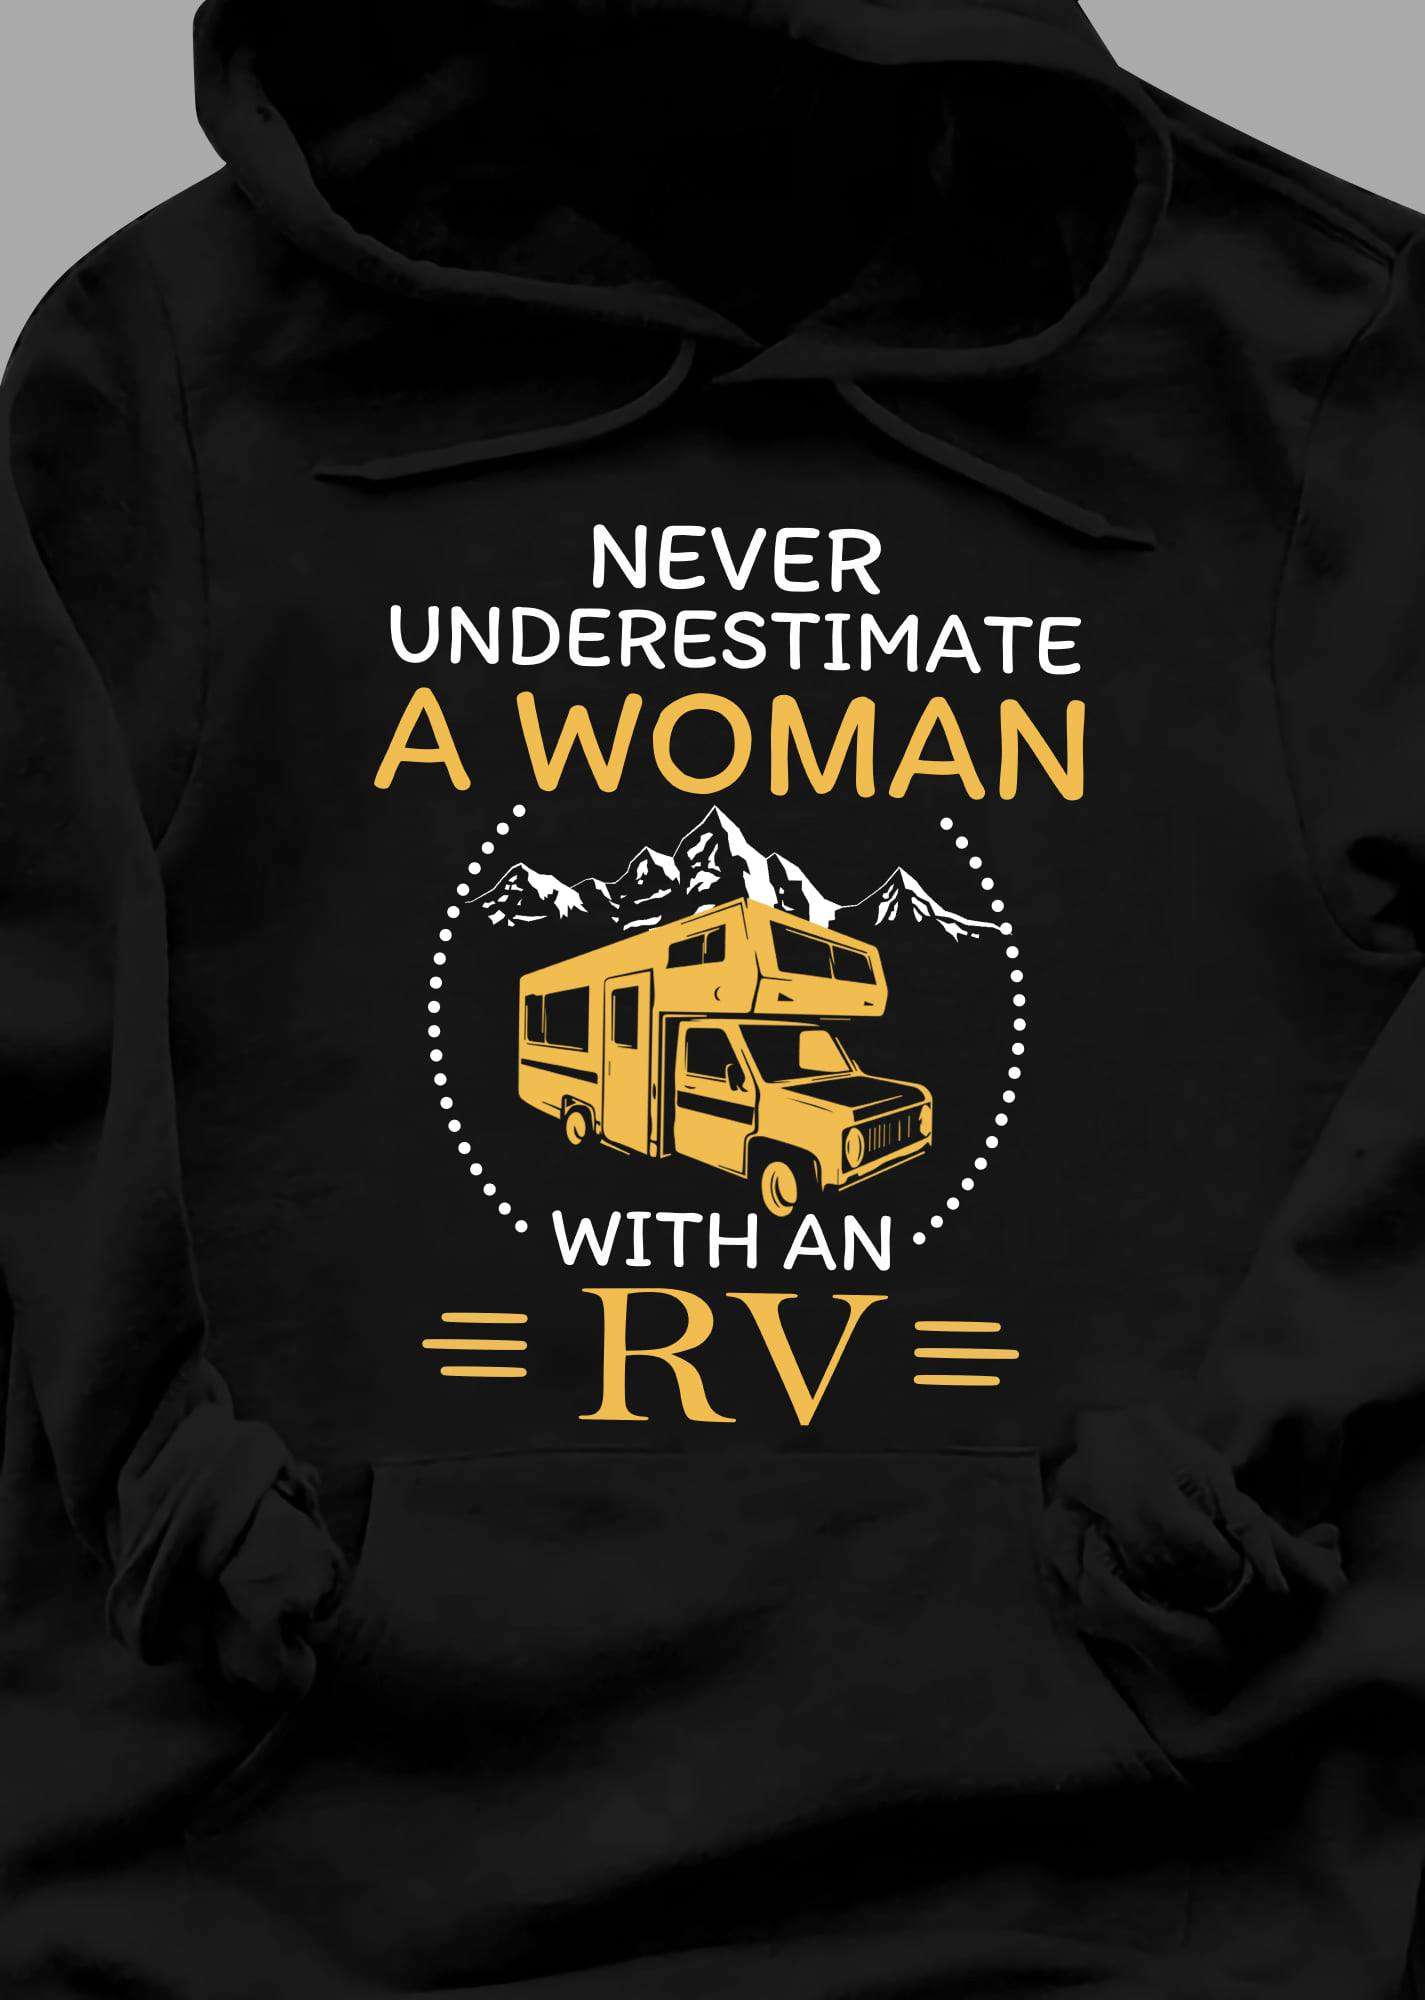 Never underestimate a woman with an RV - Recreational vehicle, car for camping